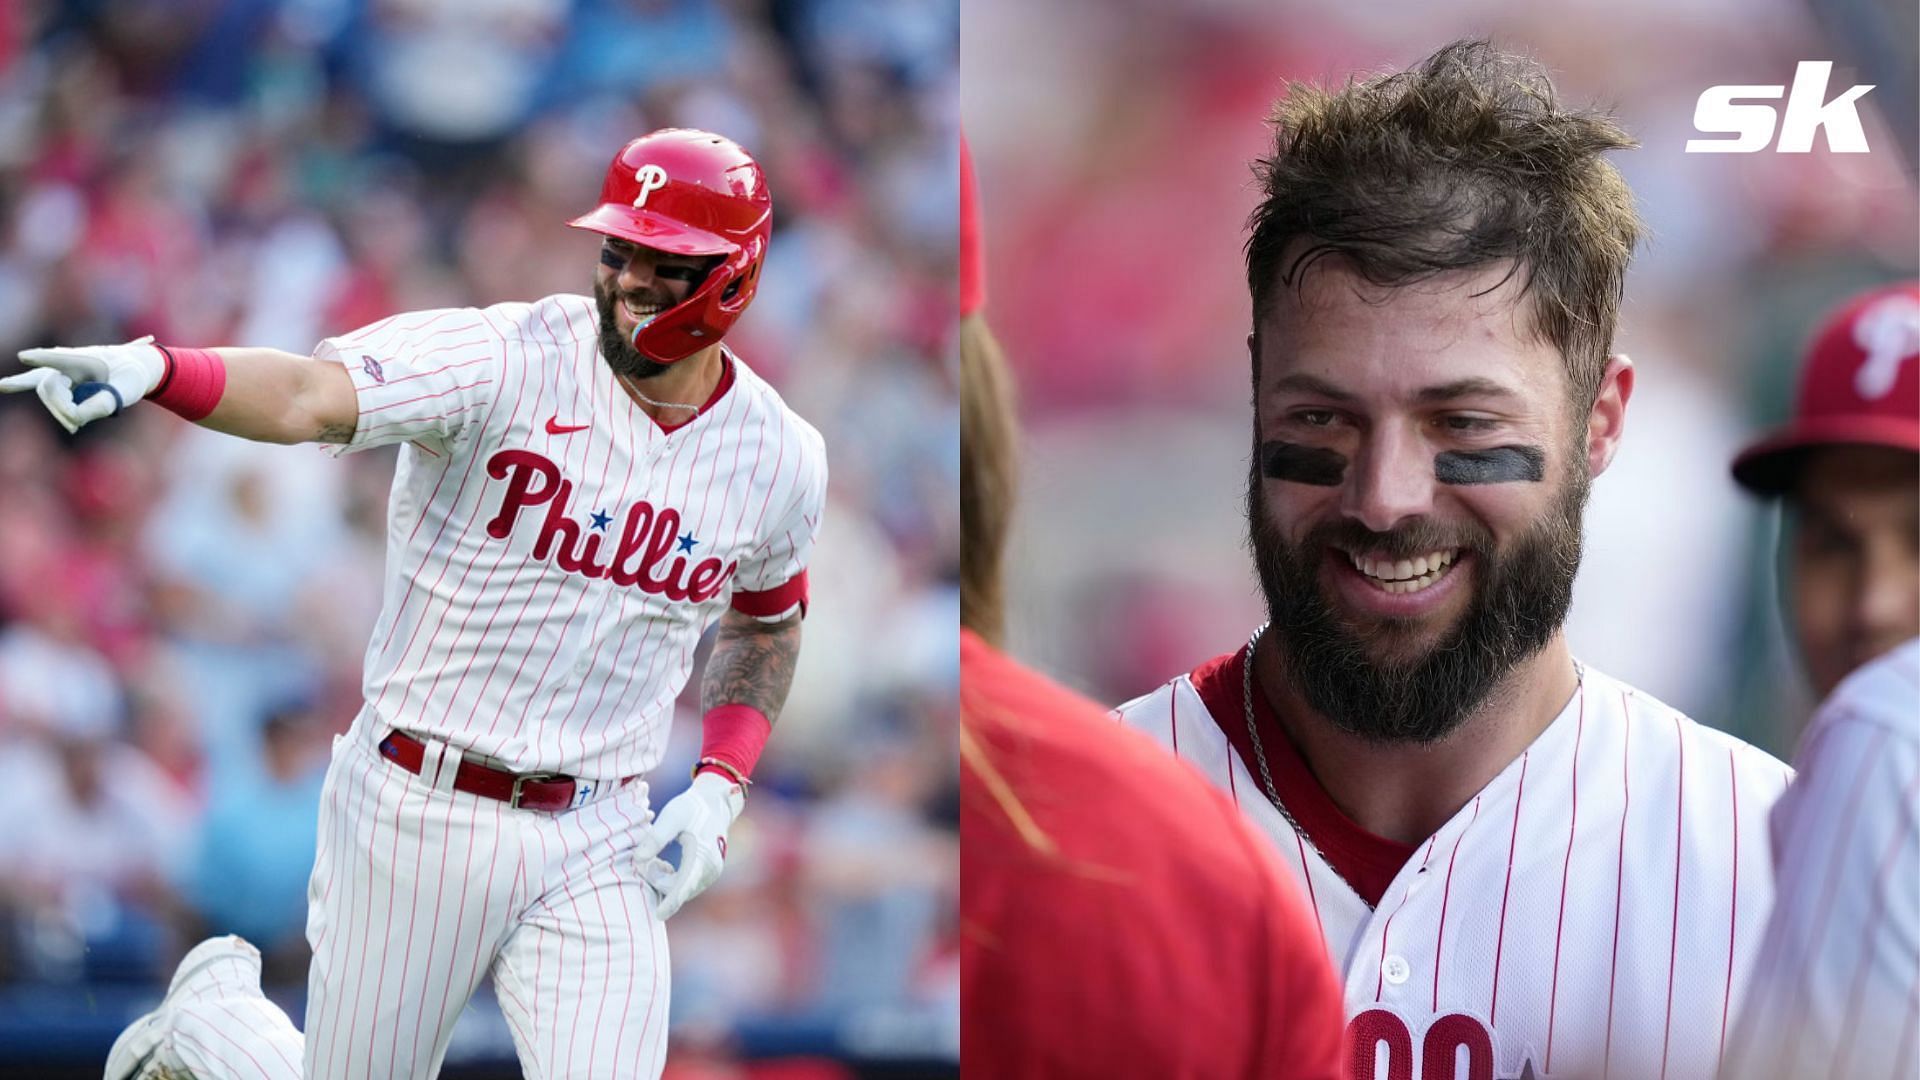 Weston Wilson homers in first Phillies at-bat, years in the minors